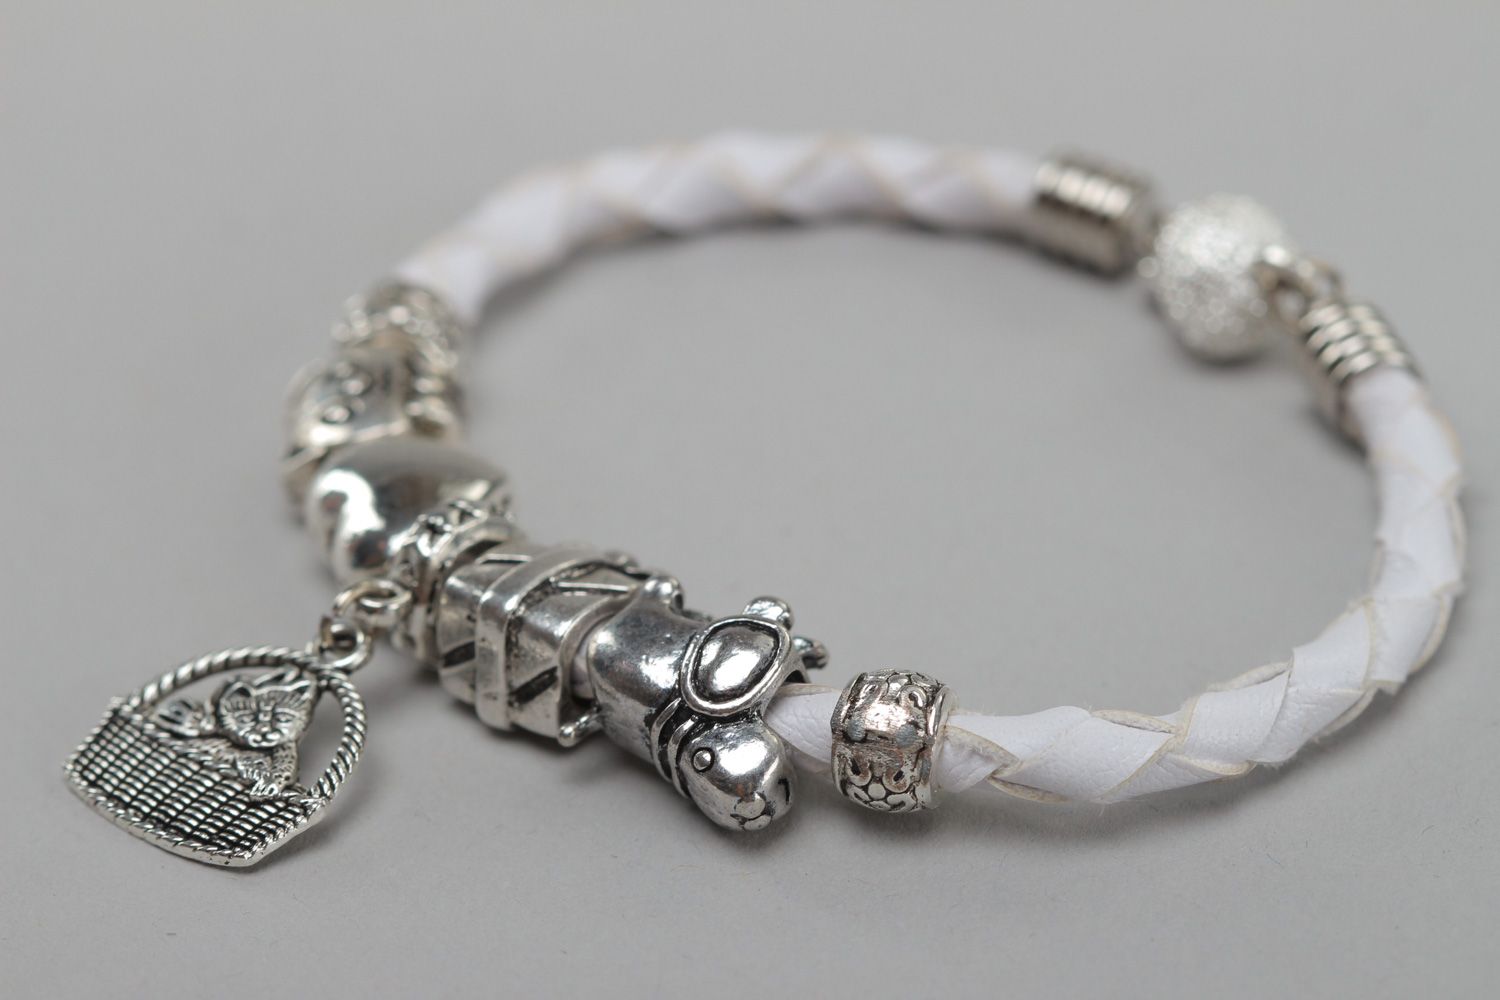 Handmade wrist bracelet woven of faux leather of white color with metal charm photo 2